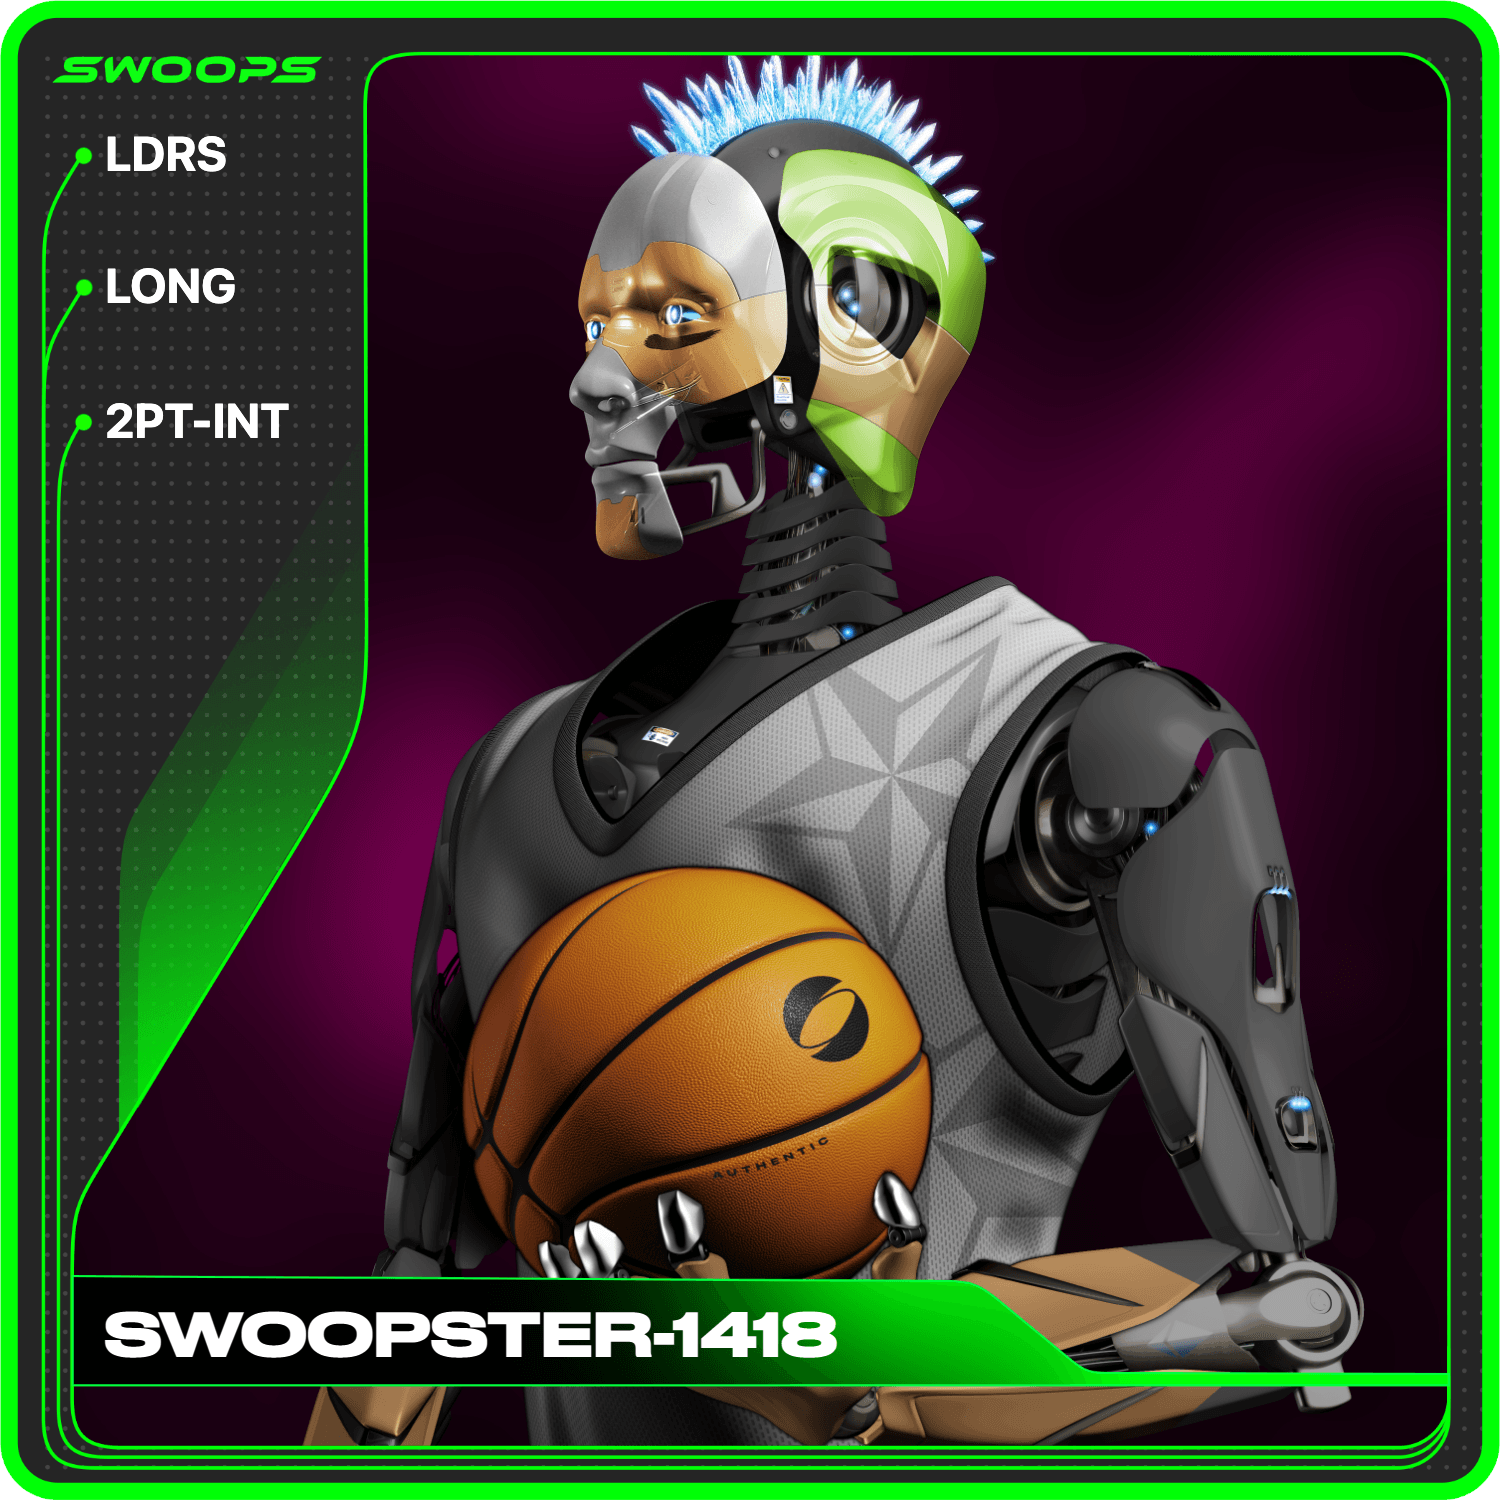 SWOOPSTER-1418